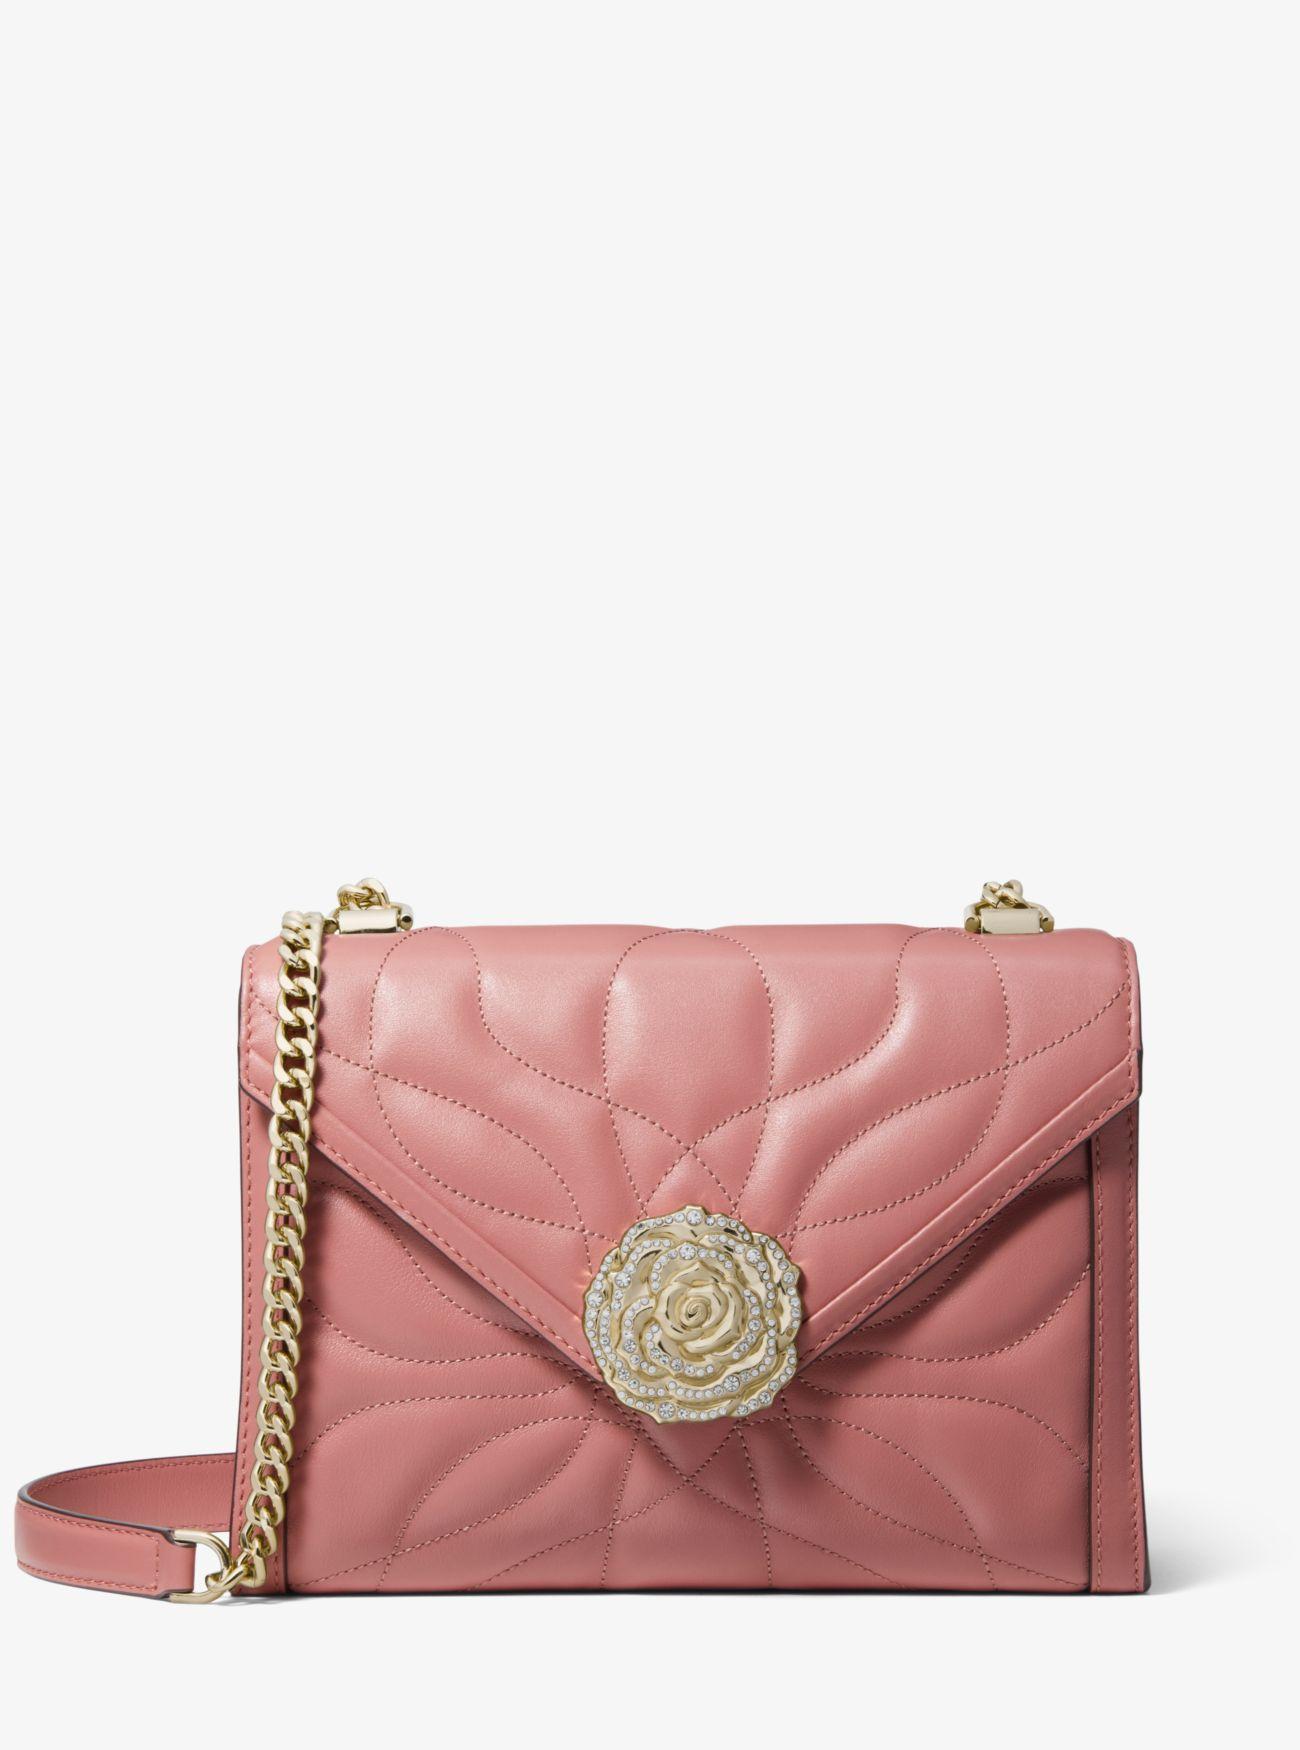 MICHAEL Michael Kors Whitney Large Petal Quilted Leather Convertible Shoulder Bag in Rose (Pink ...